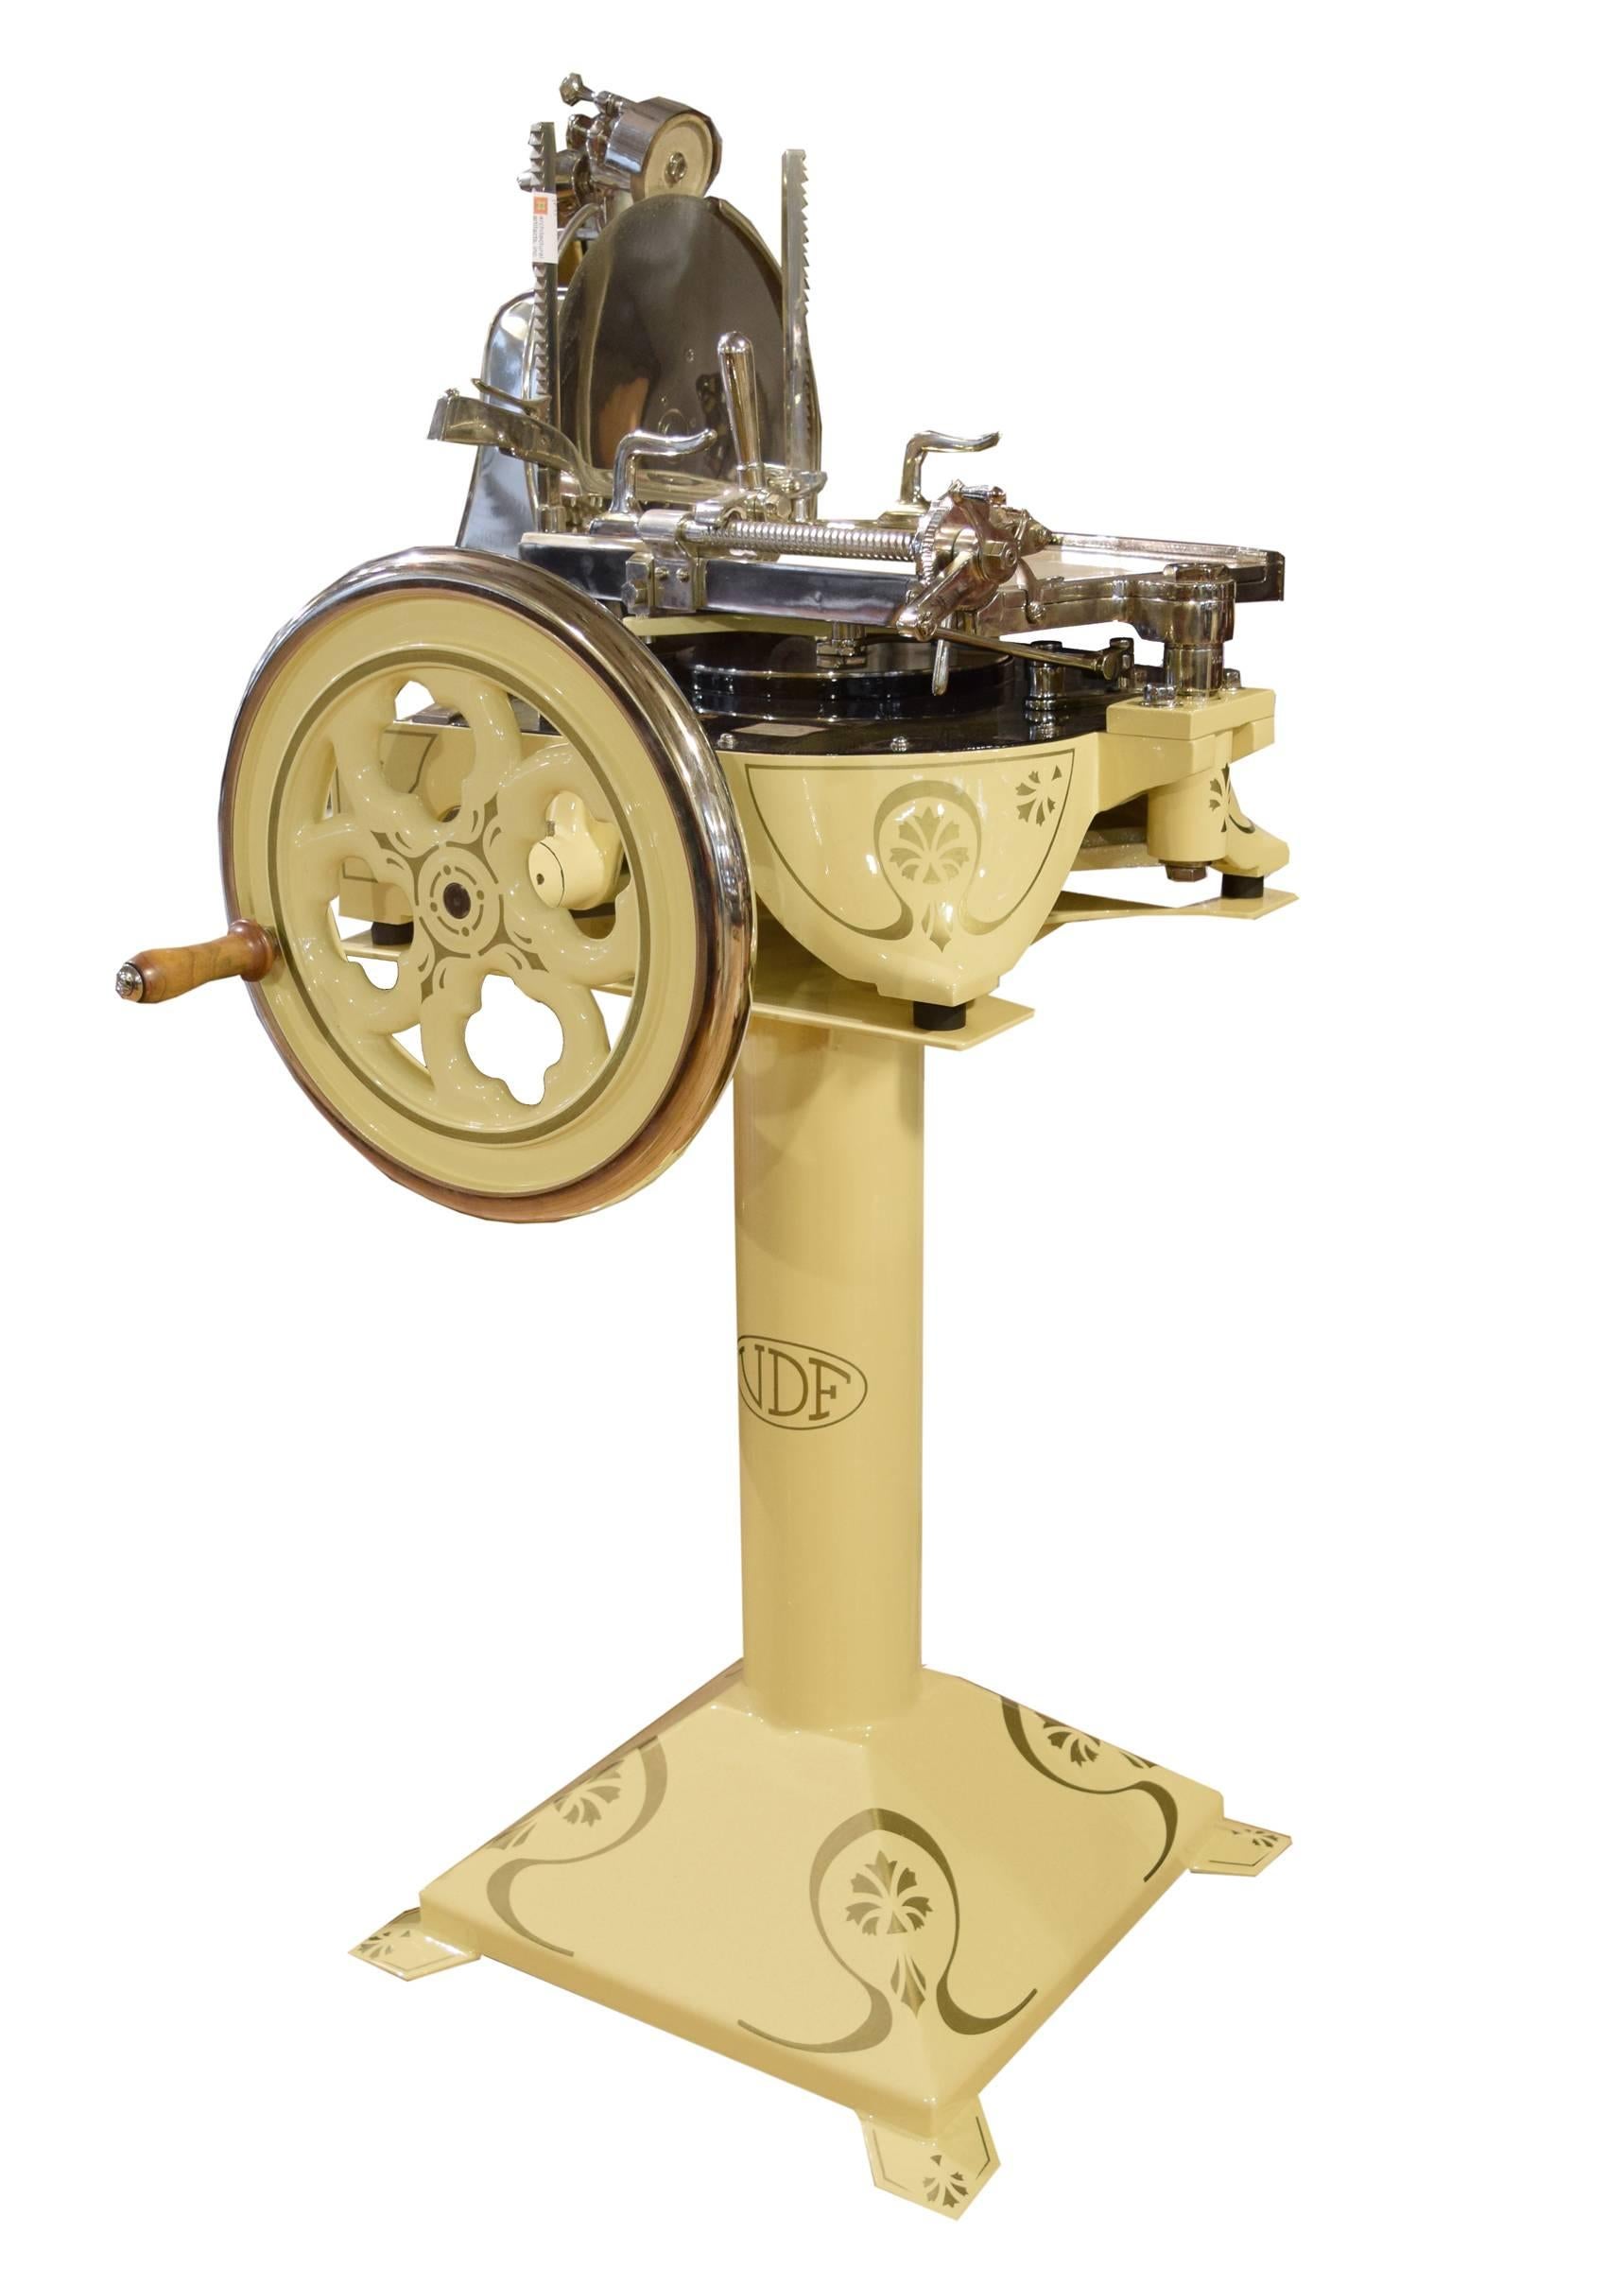 An extremely rare Burgers VDF prosciutto slicer with hand-painted pin striping and lettering, from Deventer, Netherlands. With its precision blade, this flywheel operated machine cranks out prosciutto slices thin enough to see through. Henricus